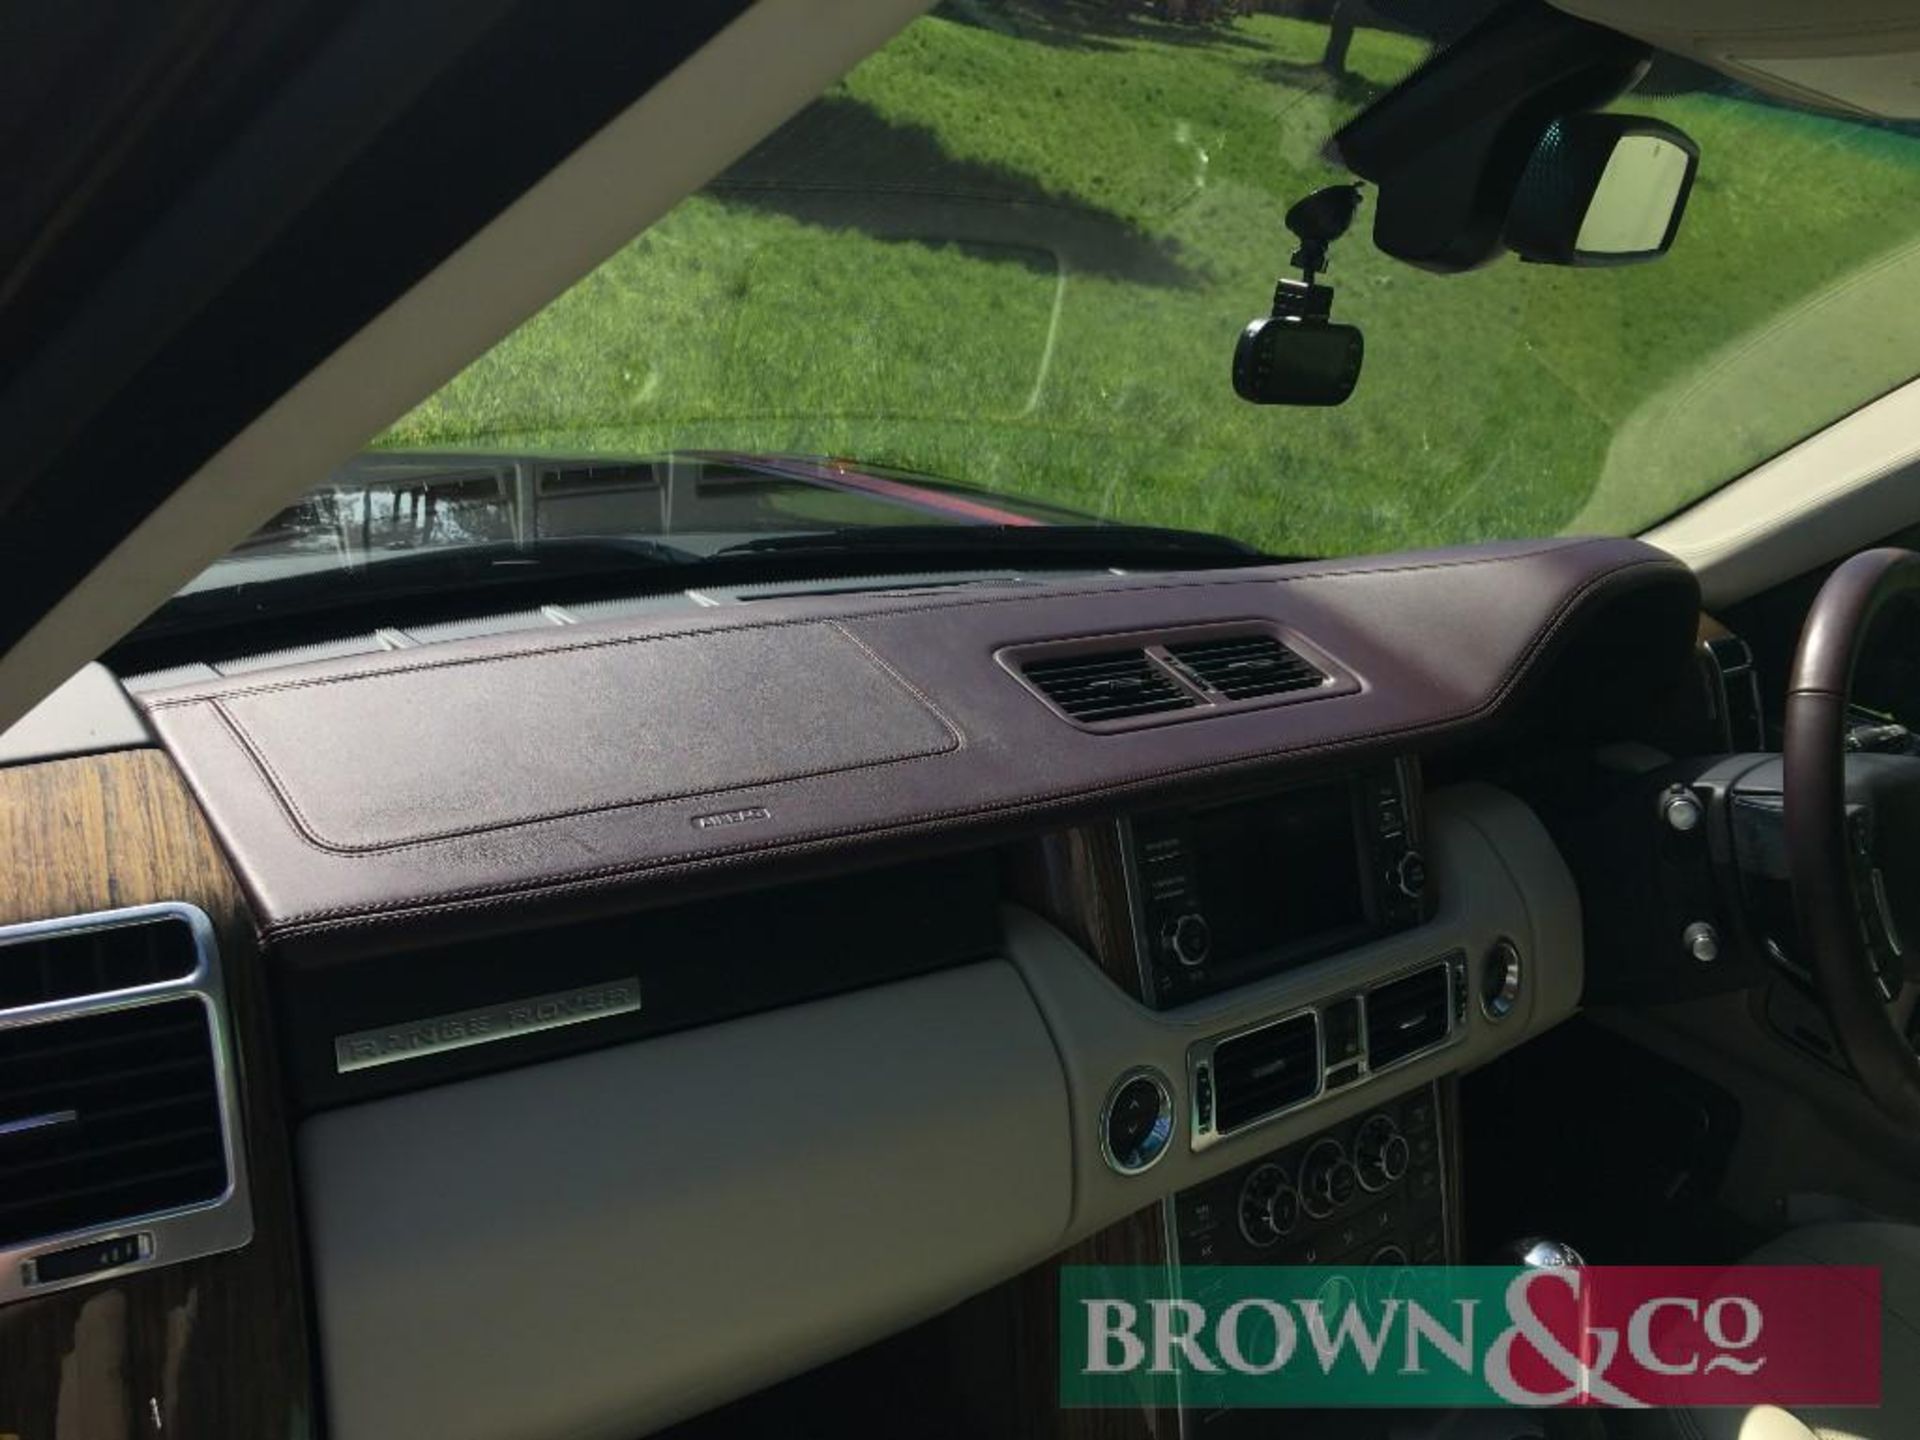 2009 Land Rover Range Rover Autobiography Ultimate Edition - Image 33 of 55